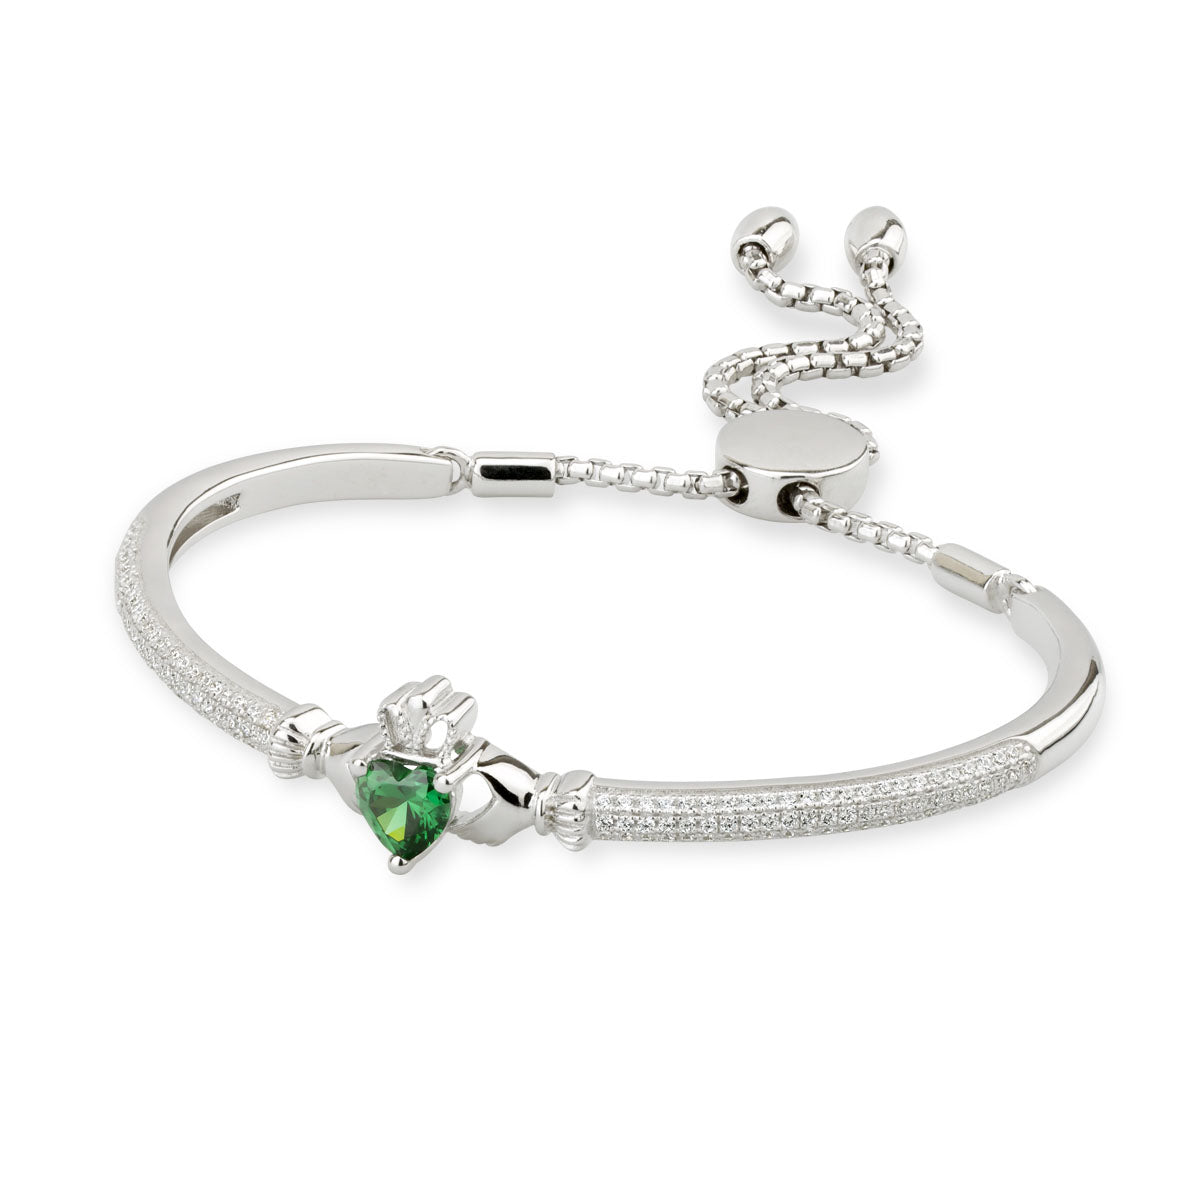 sterling silver cubic zirconia claddagh draw string bangle s5890 from Solvar